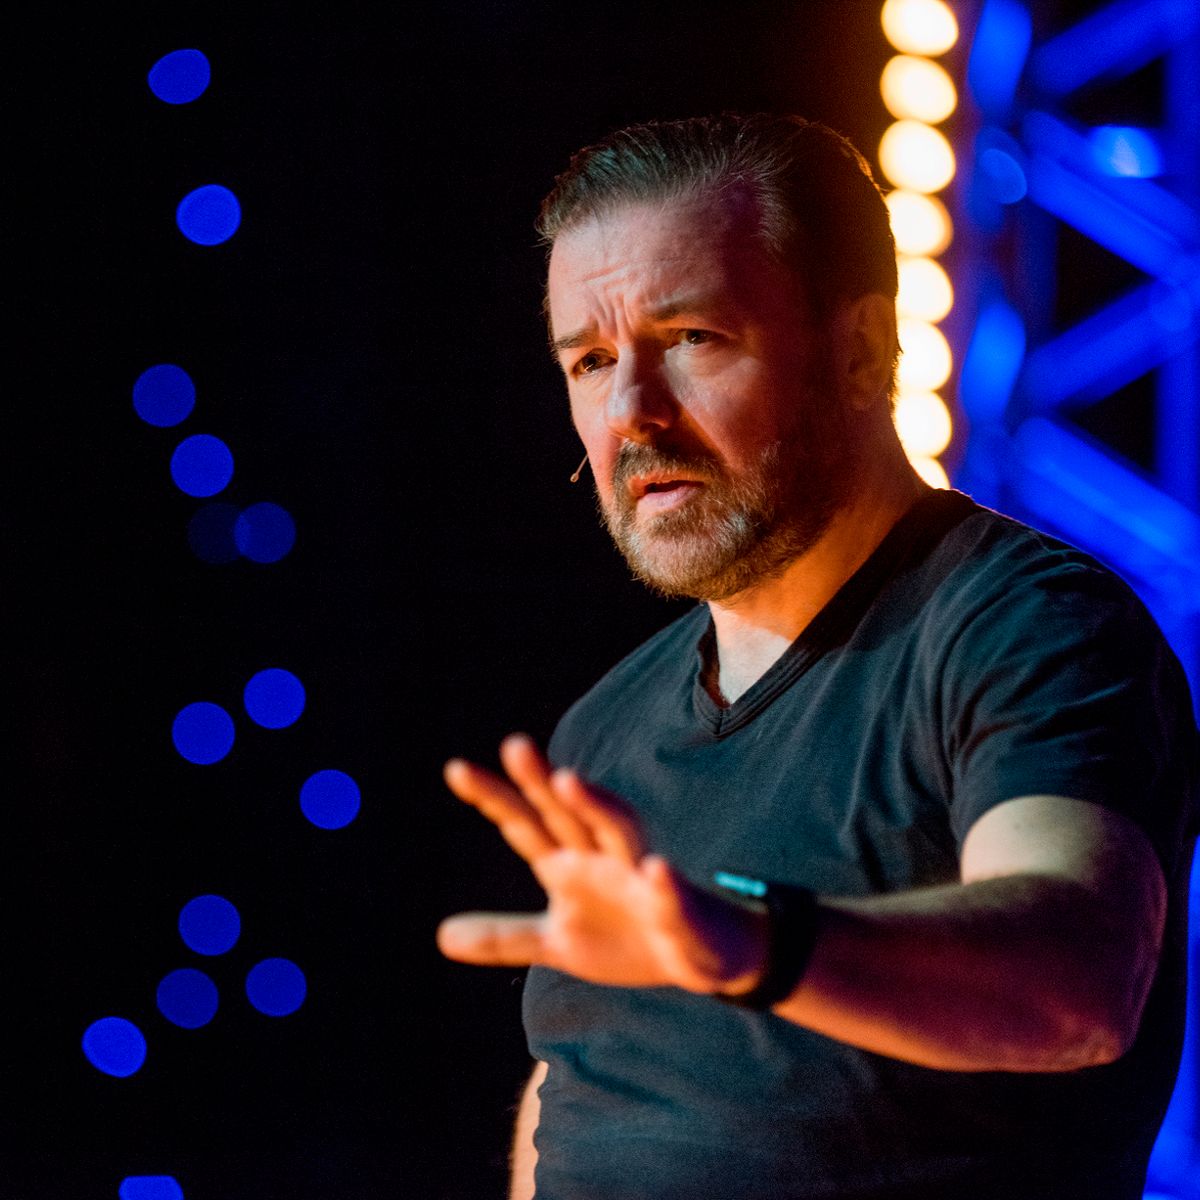 Ricky Gervais: When you are dead, you do not know you are dead. It's only painful & difficult for others. The same applies when you are stupid. -Mello1182